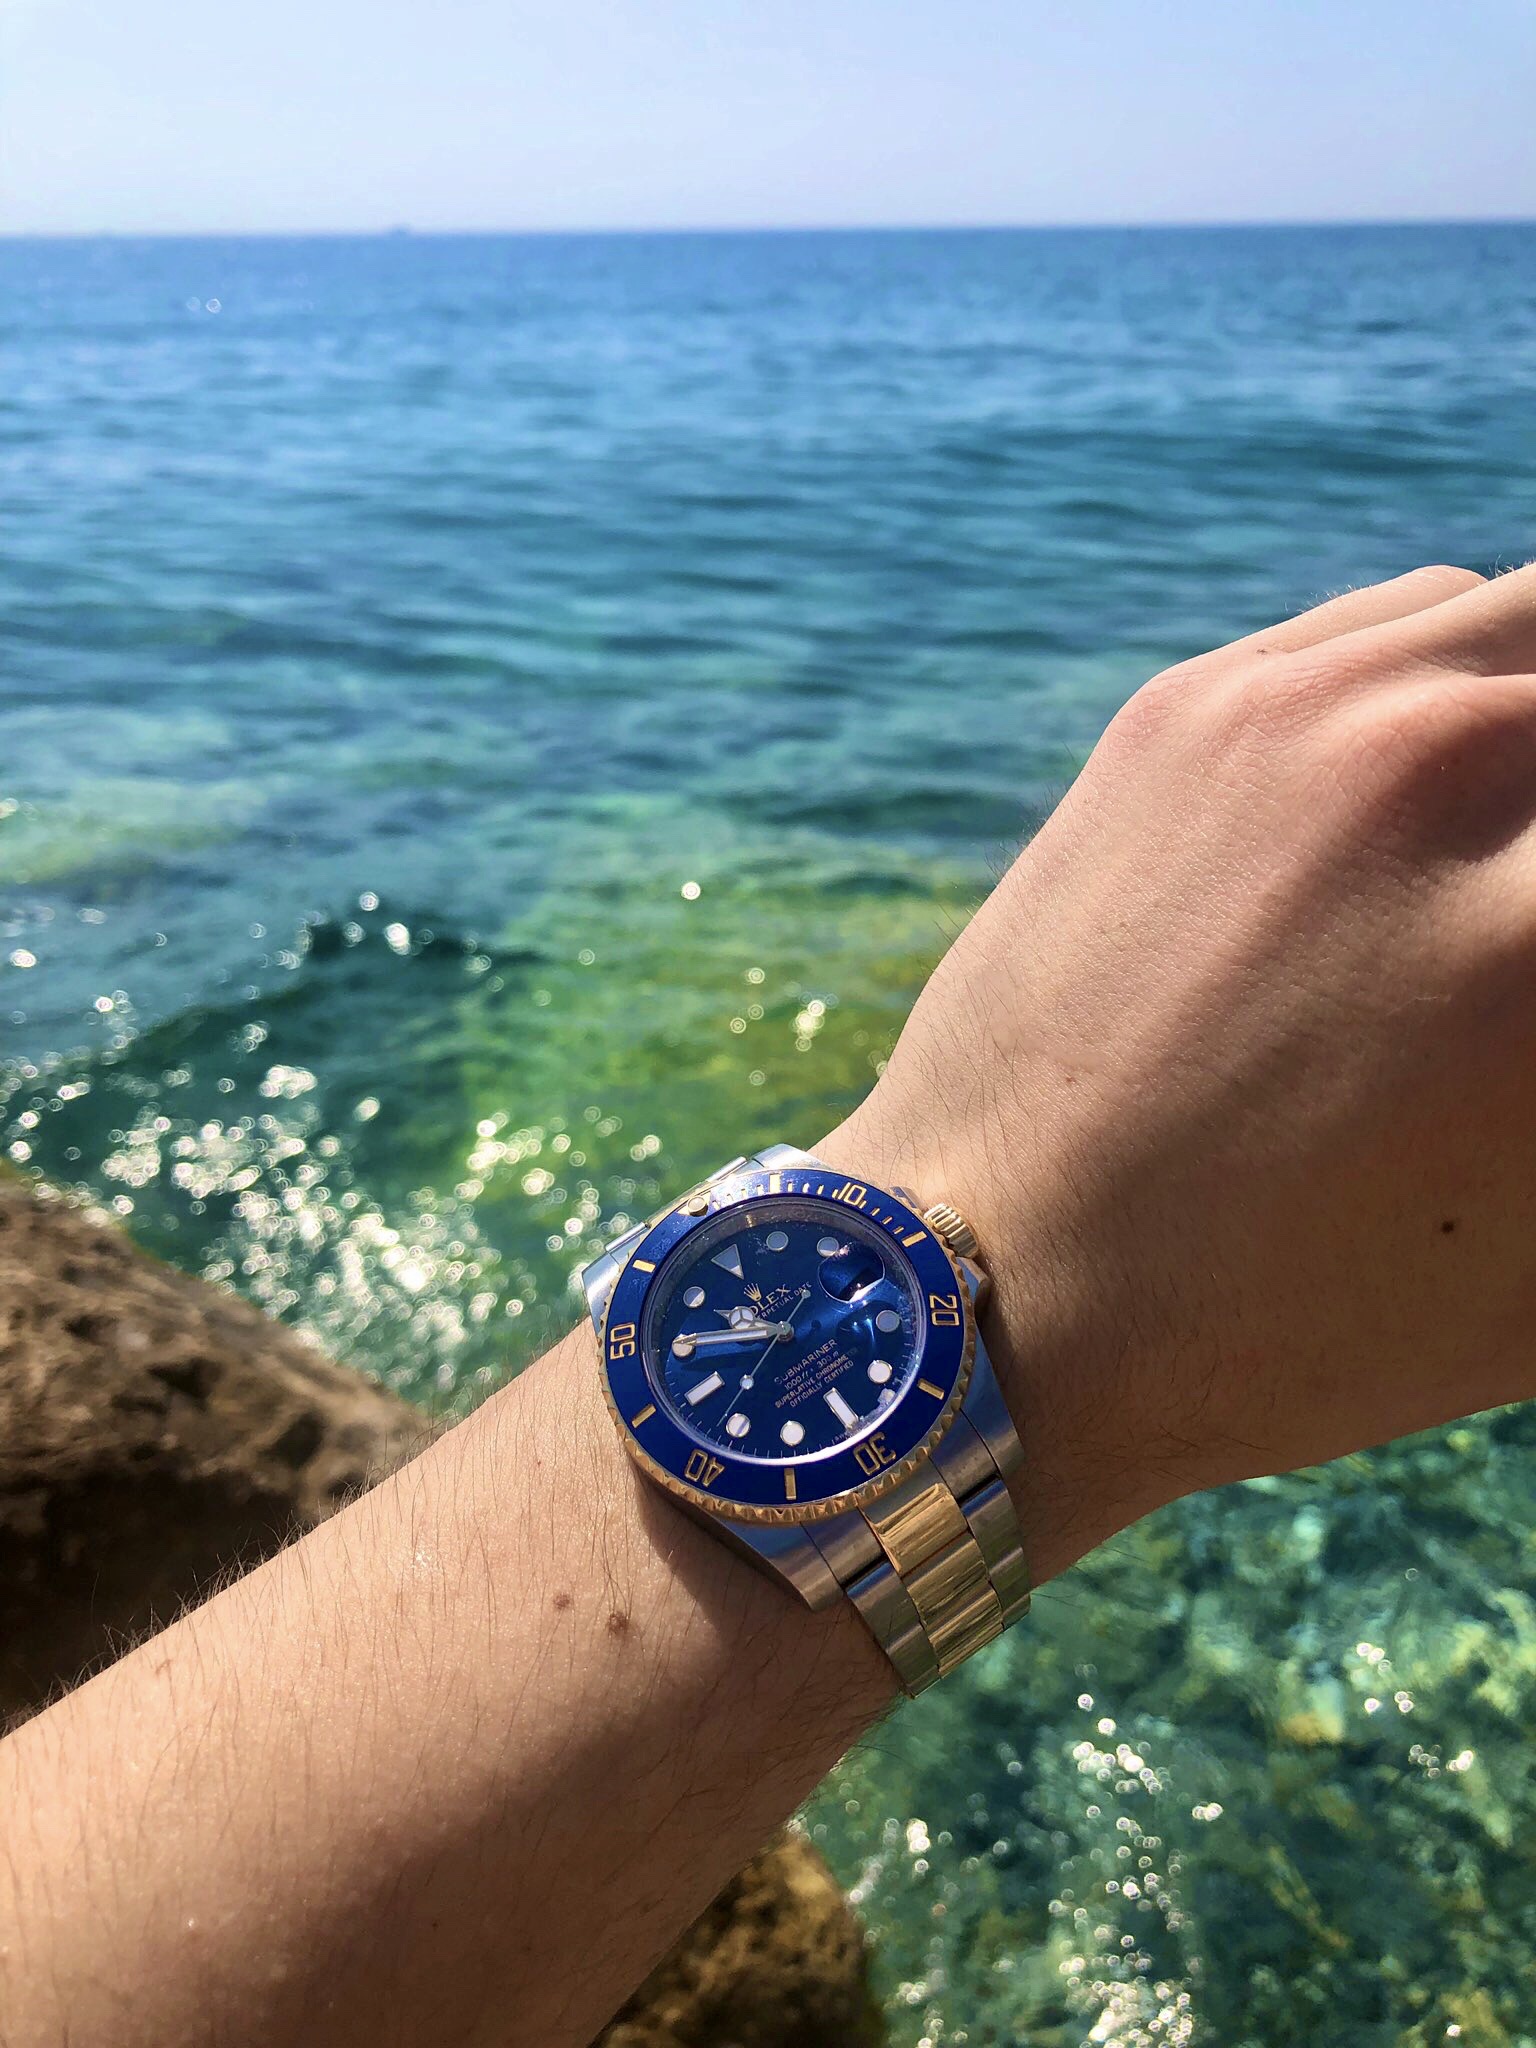 My Sentimental Throwback to Better Times – Holiday Watches